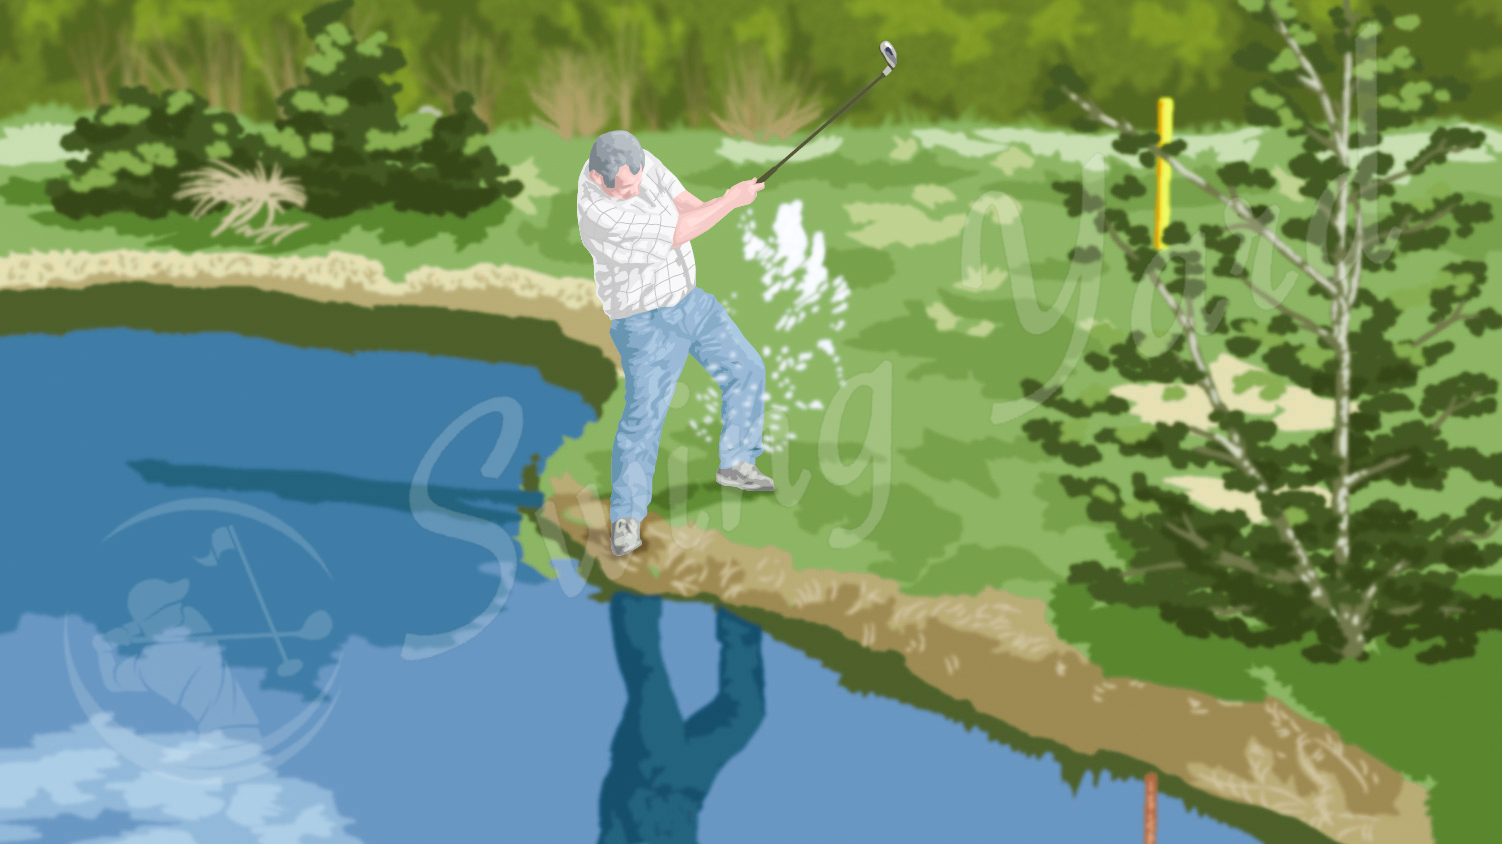 Man hitting golf ball out of the water hazard